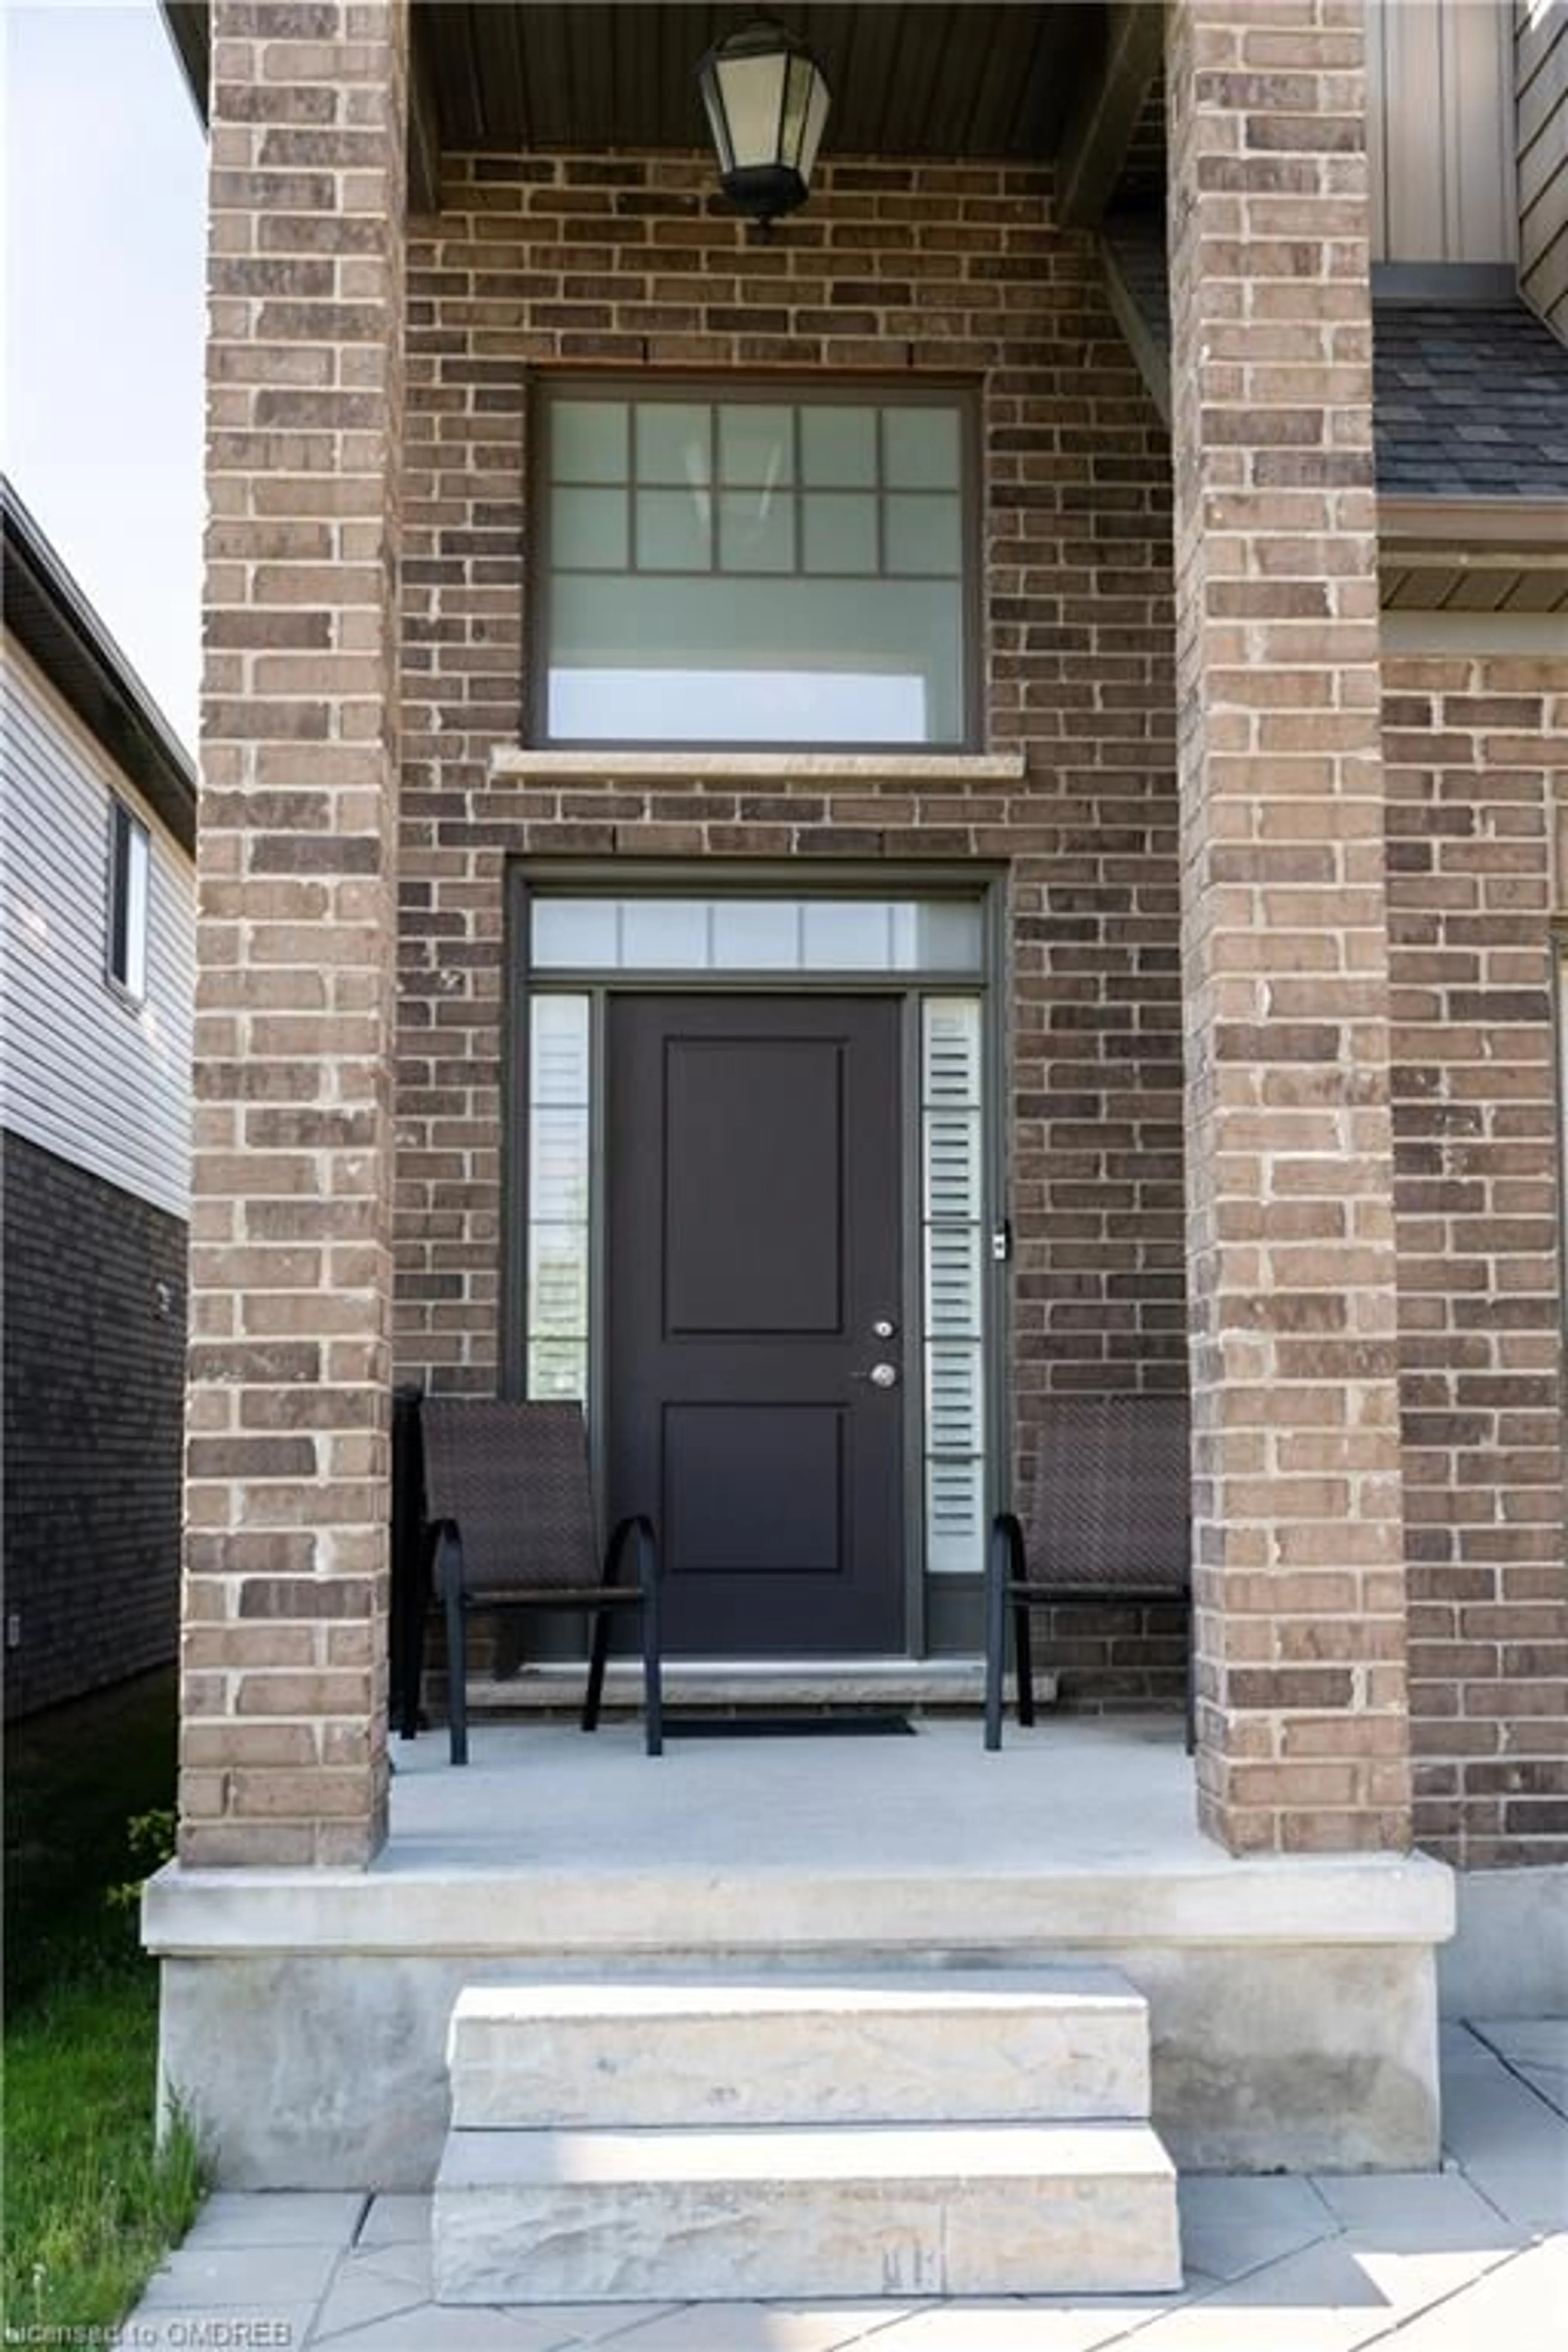 Home with brick exterior material for 1665 Finley Crescent Cres, London Ontario N6G 0B4